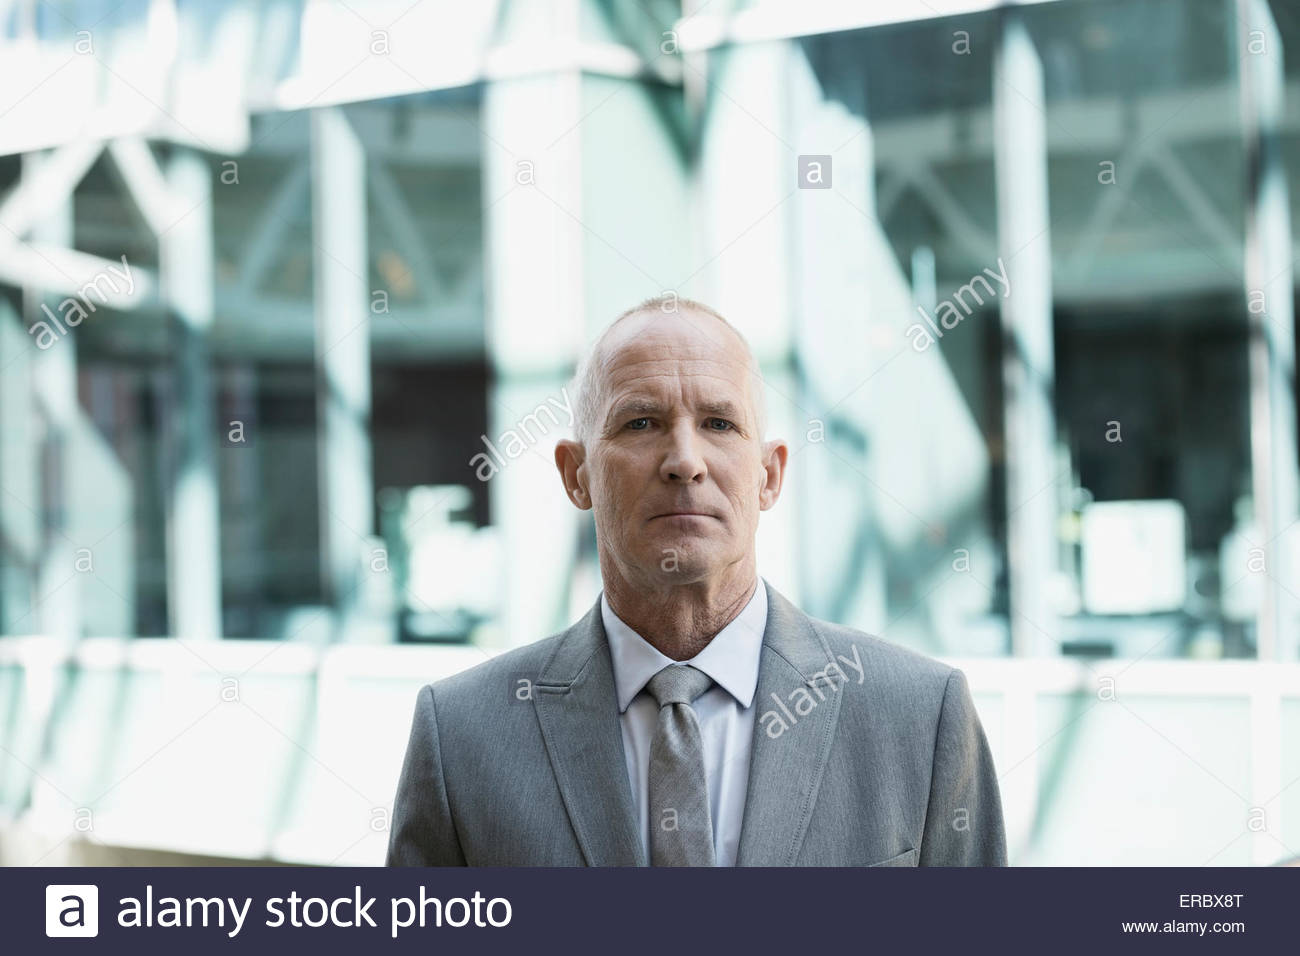 Portrait of serious businessman in suit Stock Photo